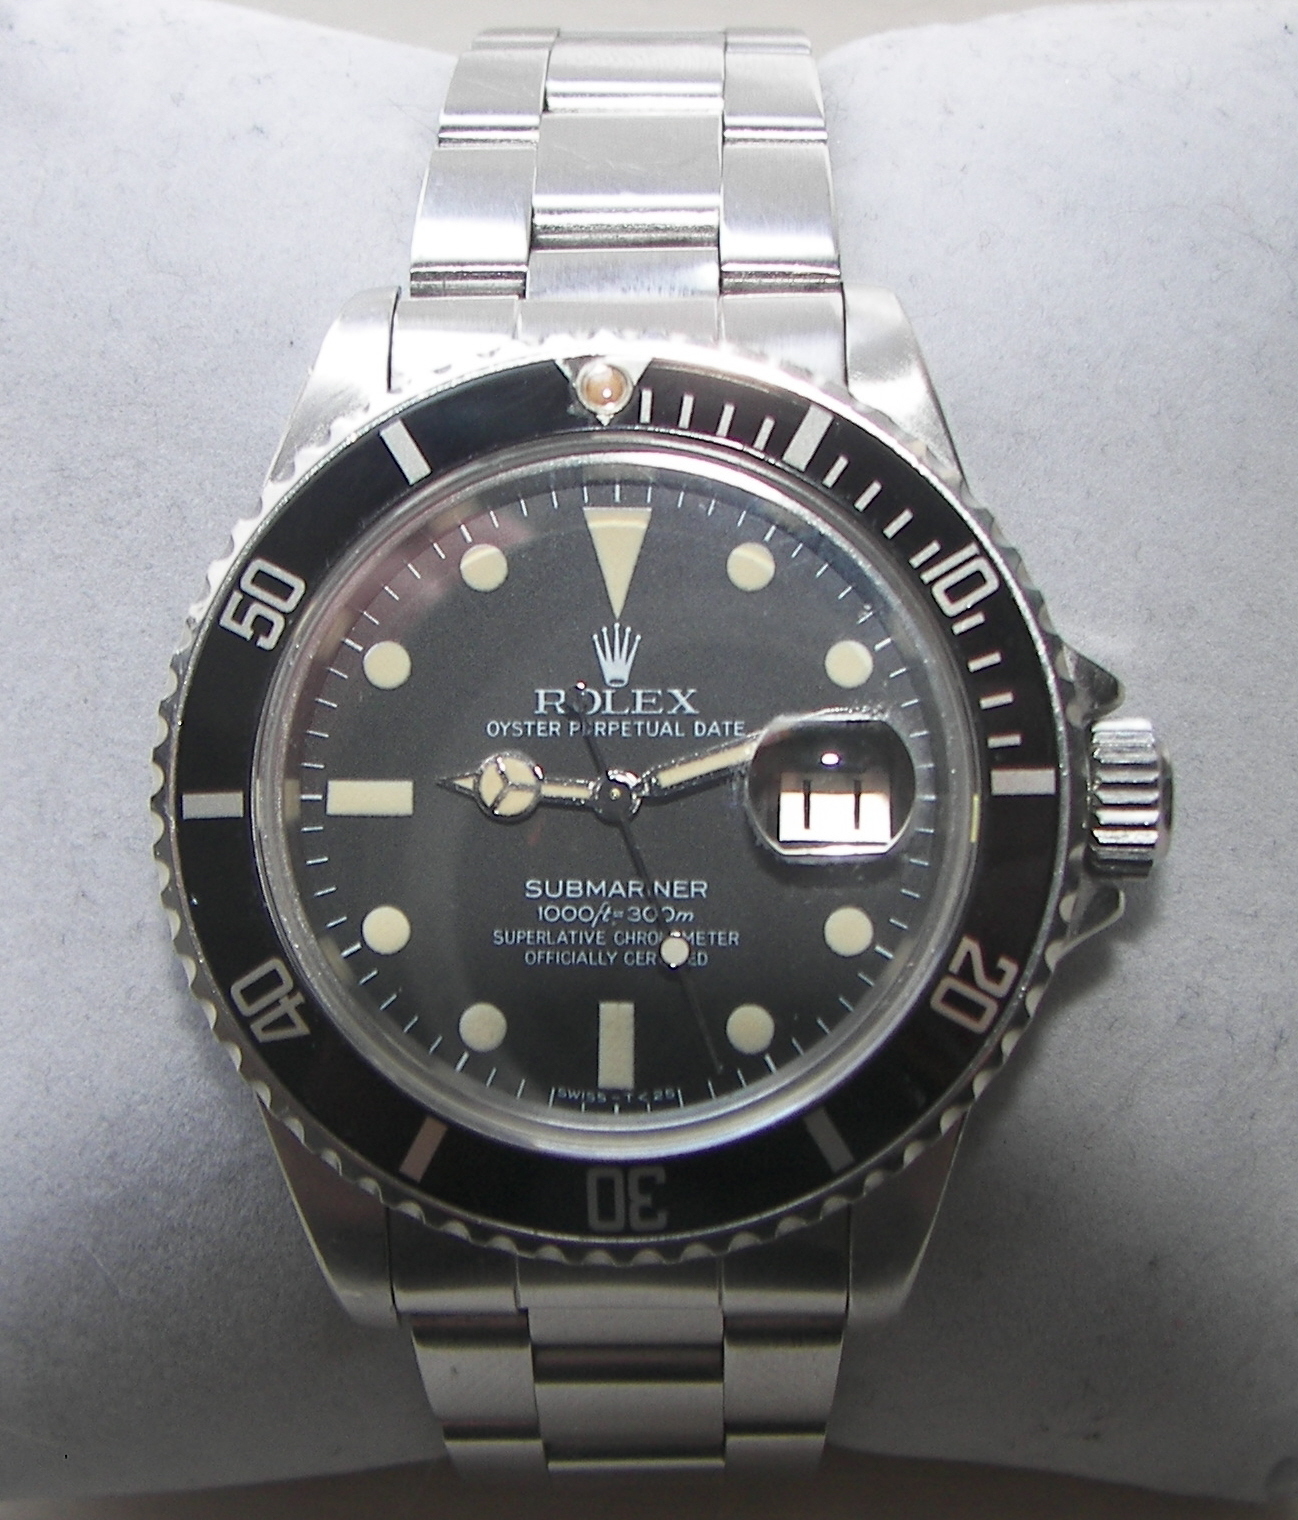 5. Is Investing in a Rolex Worth It? Exploring the Long-Term Value